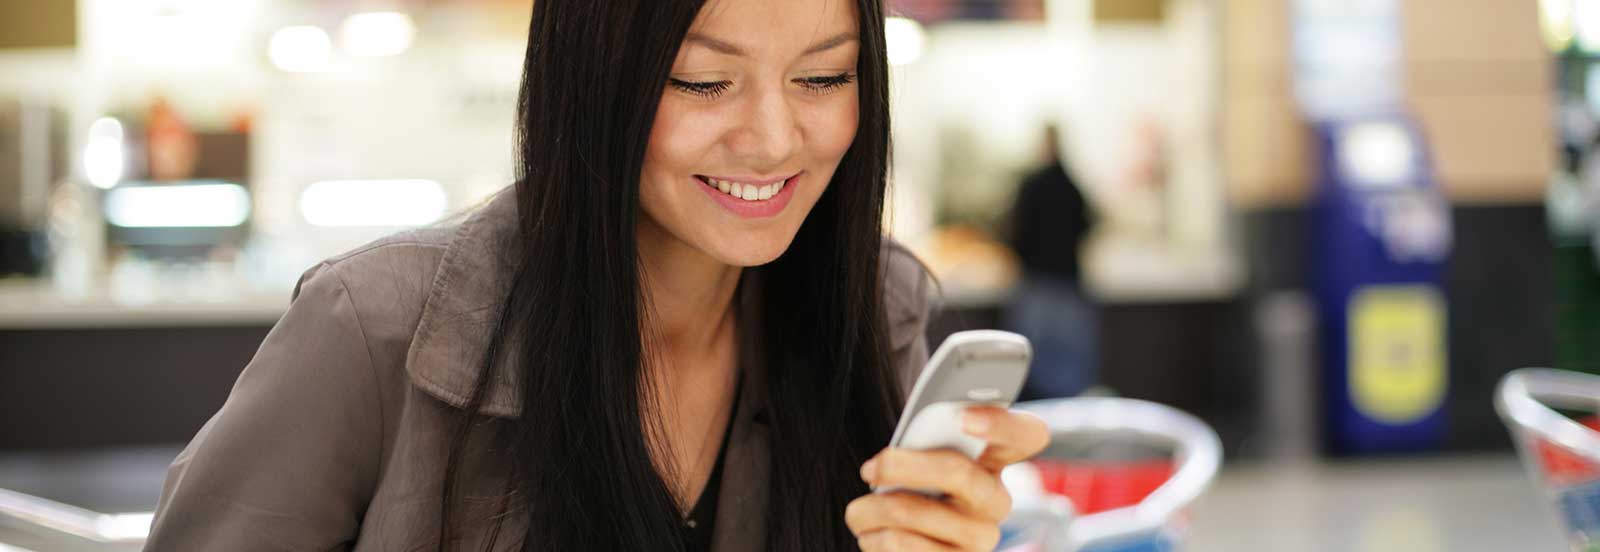 Lady looking at a cell phone with a blurry background. - 1600x552